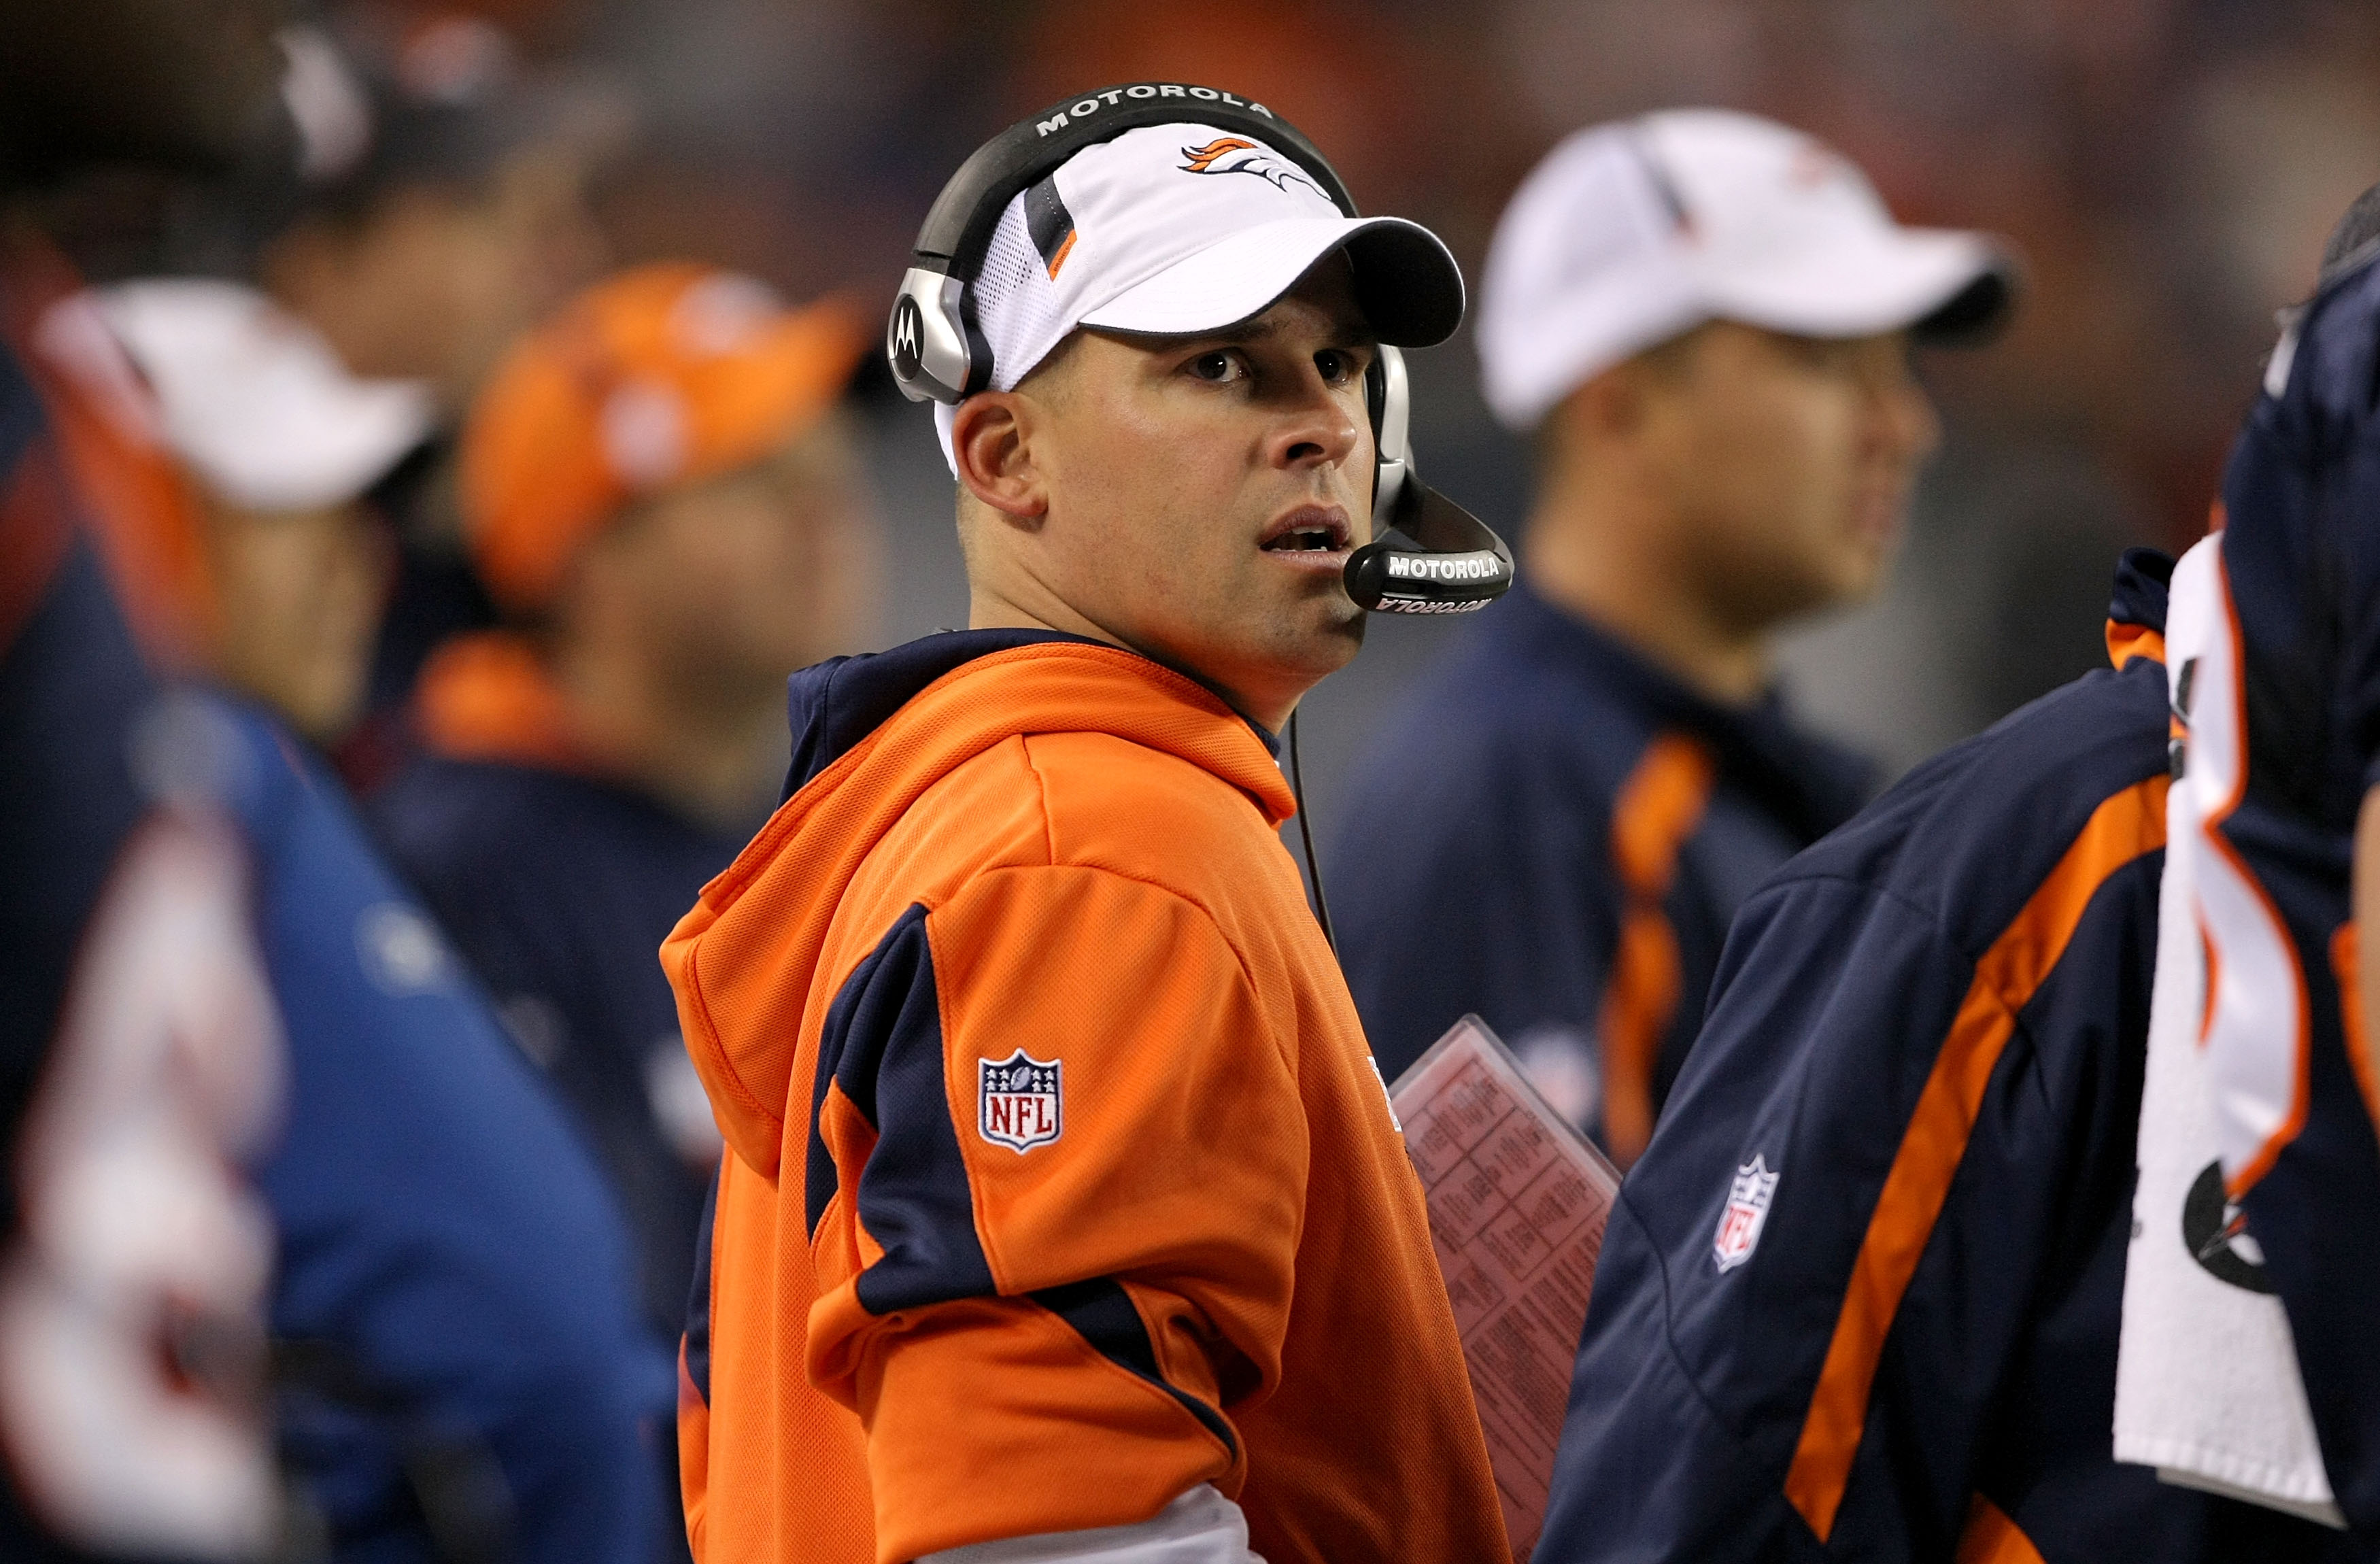 DENVER - NOVEMBER 26:  Head coach Josh McDaniels of the Denver Broncos looks on from the sidelines as he leads his team against the New York Giants during NFL action at Invesco Field at Mile High on November 26, 2009 in Denver, Colorado.  (Photo by Doug P